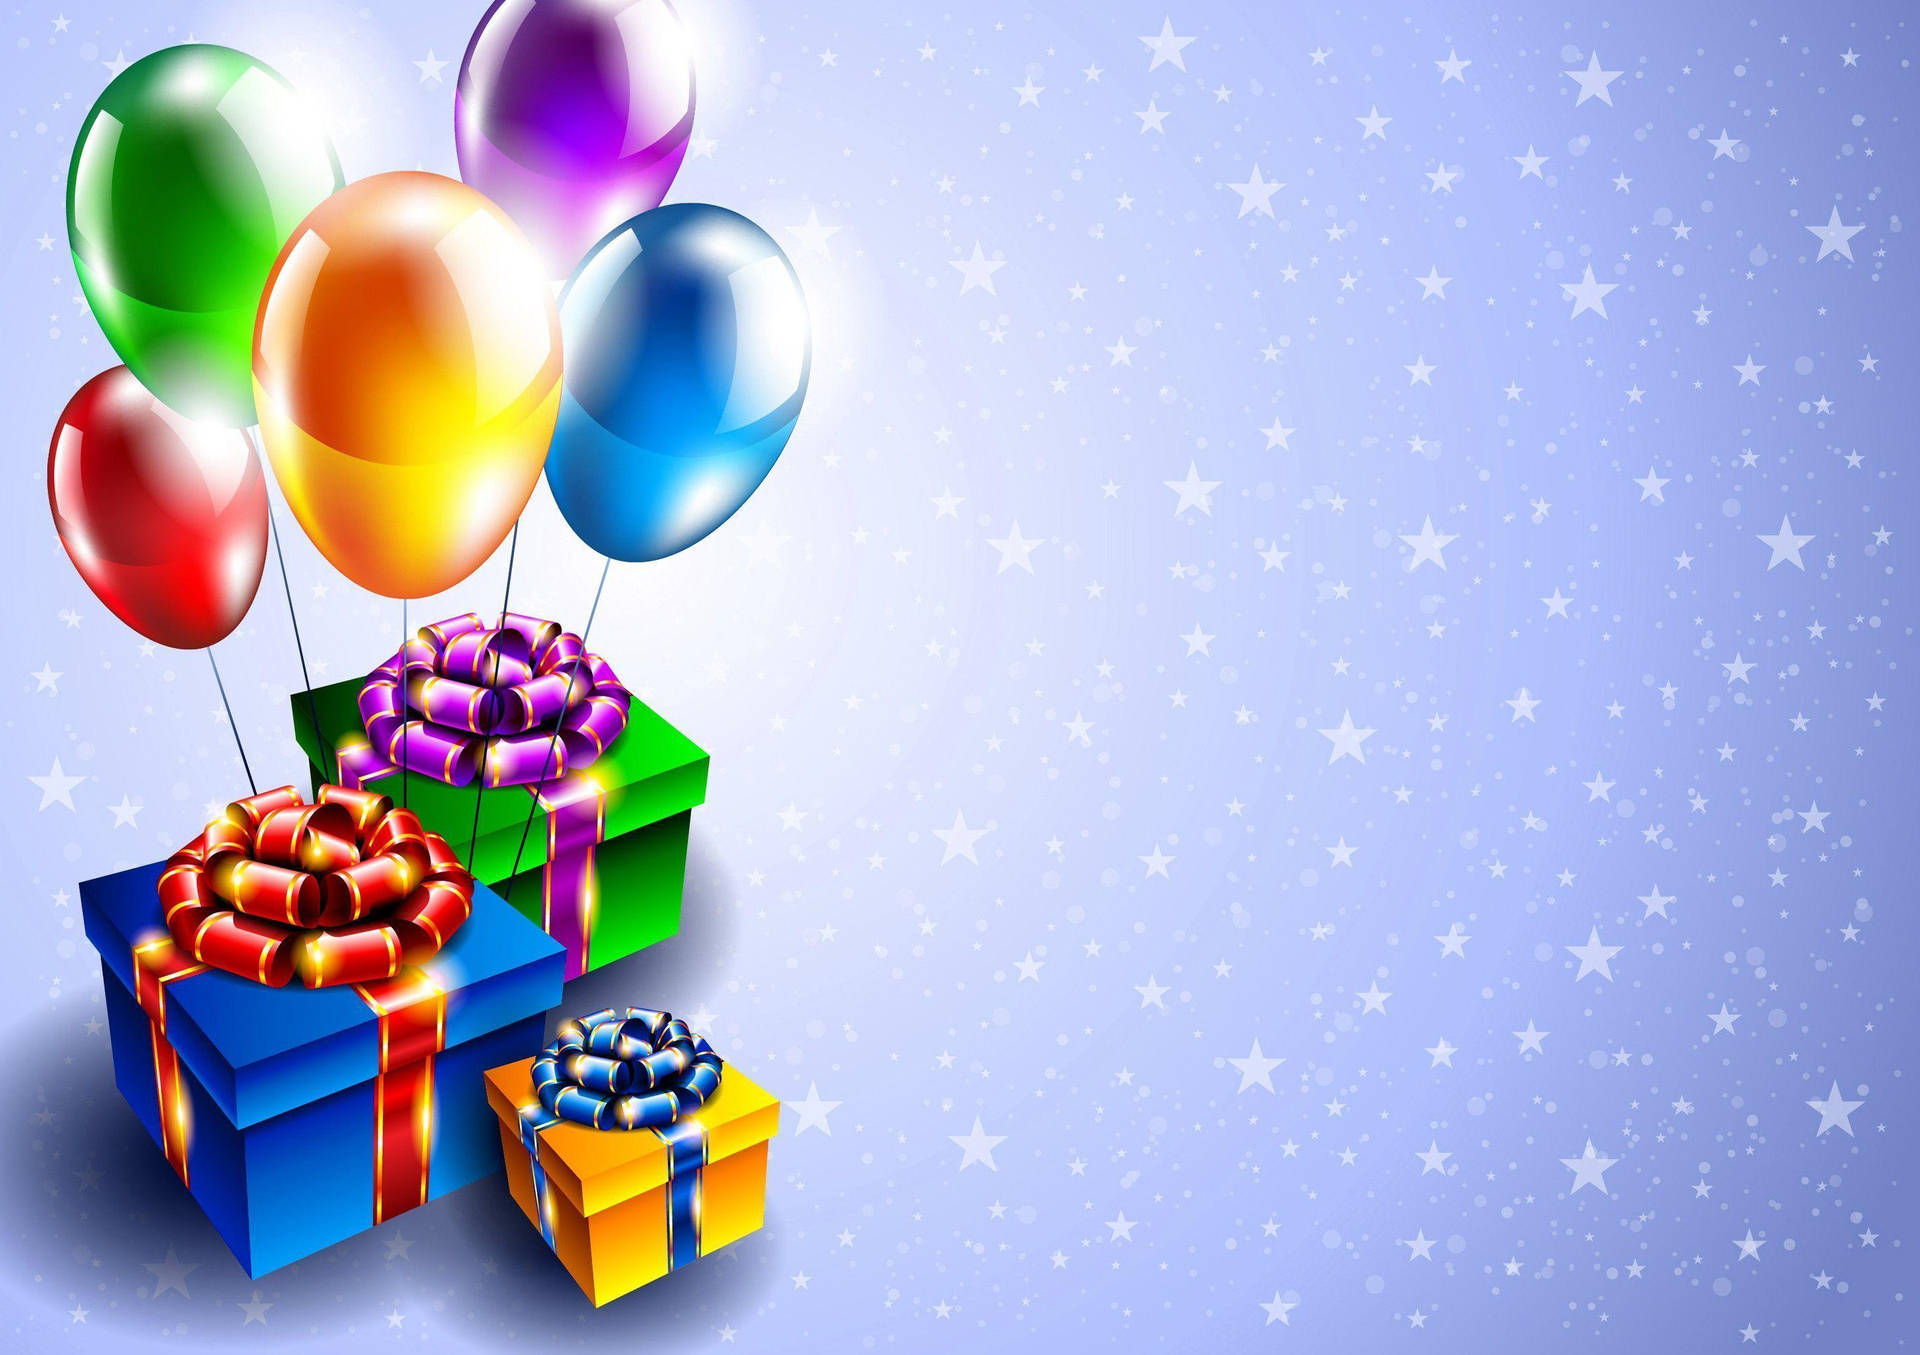 Happy Birthday Presents With Balloons Background